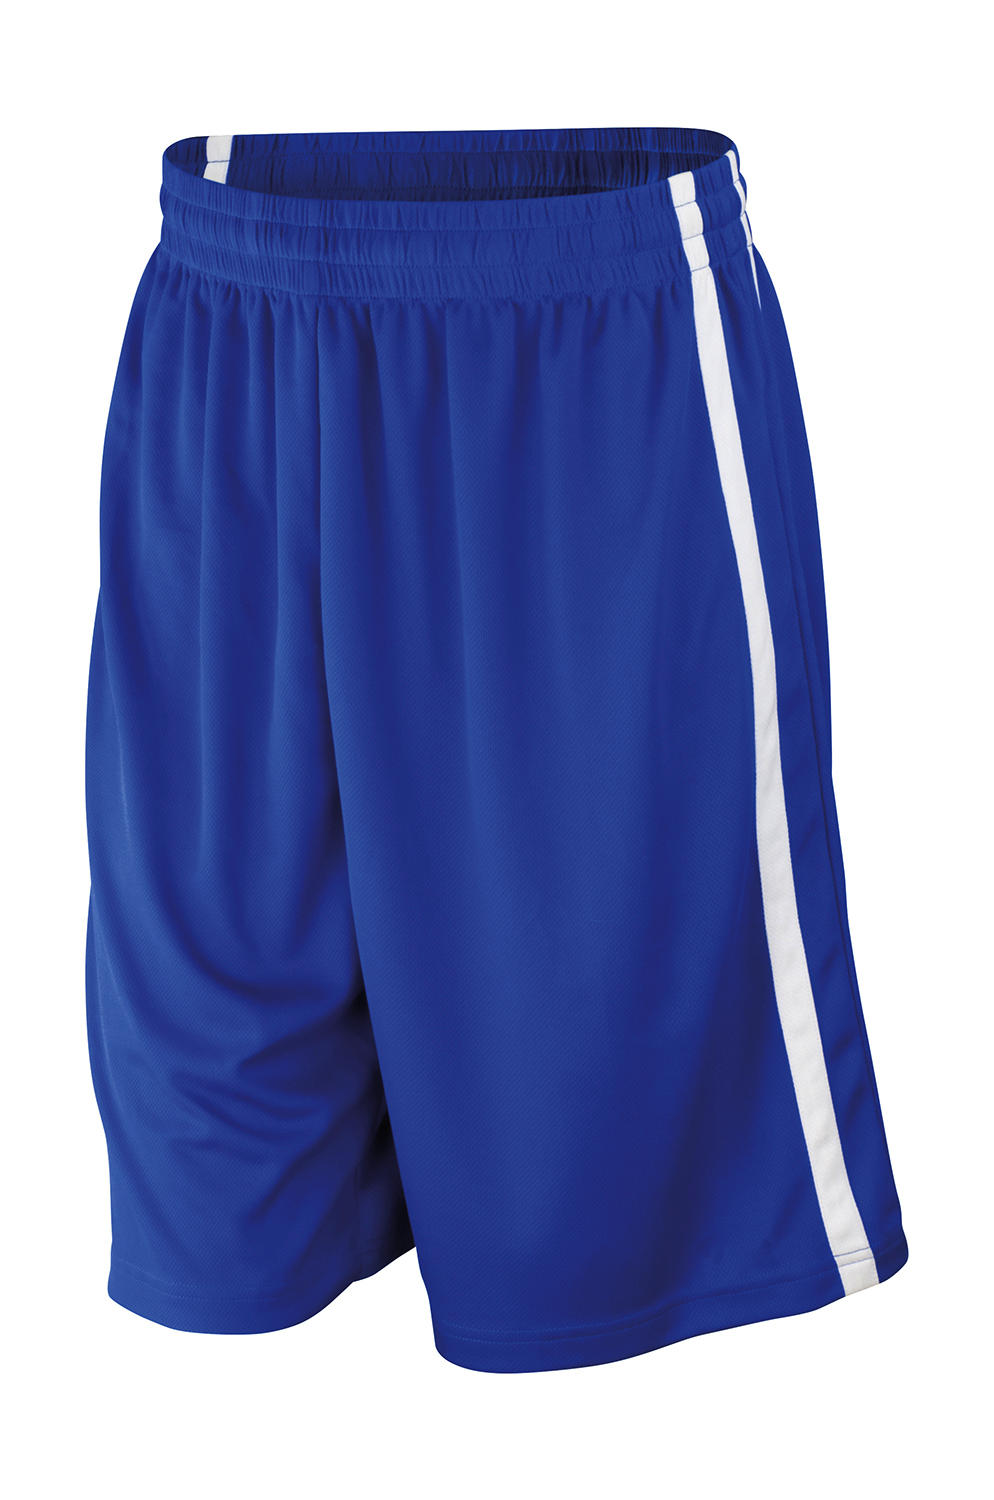  Mens Quick Dry Basketball Shorts in Farbe Royal/White